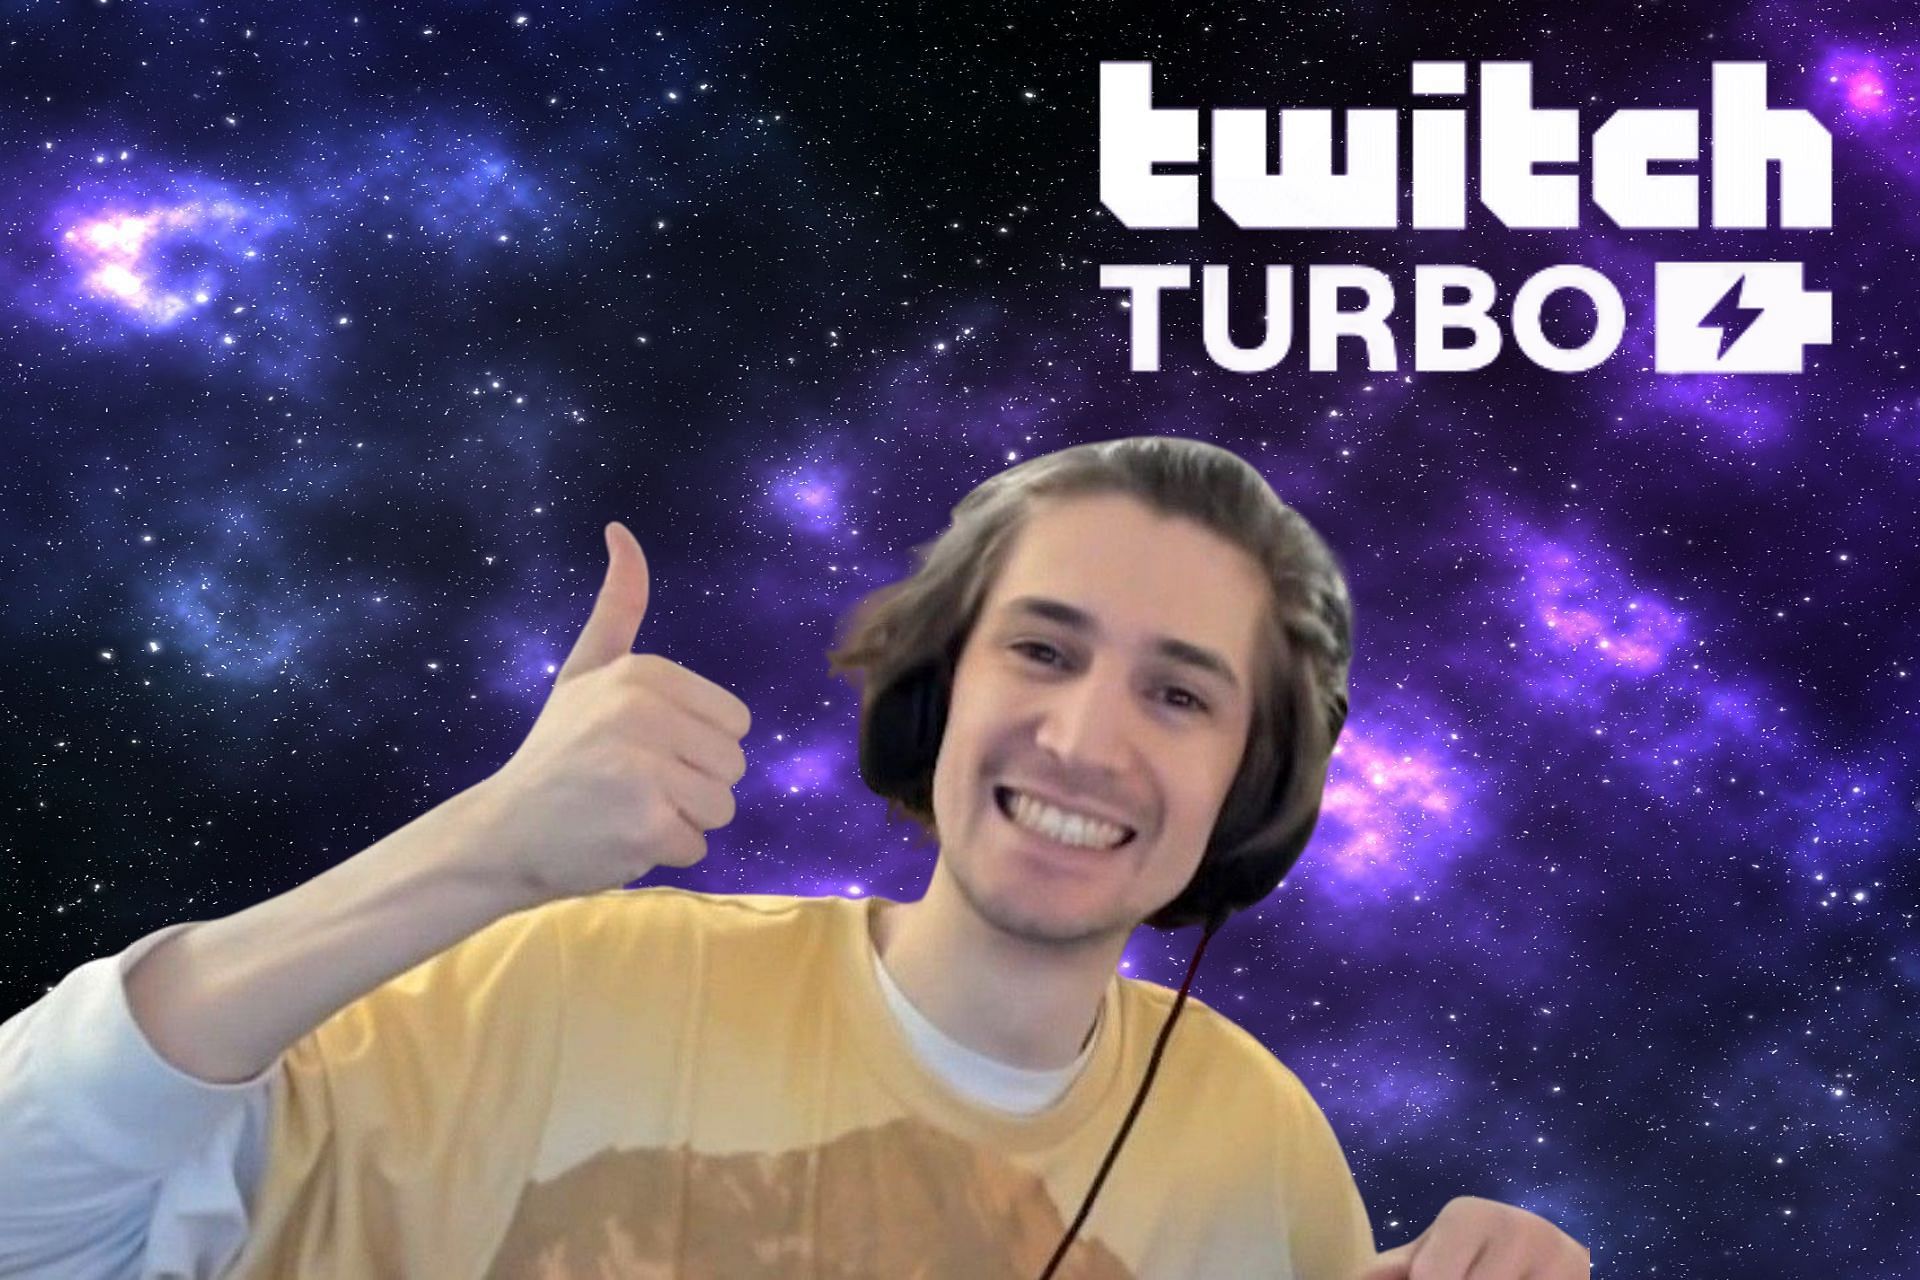 Even if it lost the streamer money, xQc said that Twitch Turbo is 100% worth it (Image via Sportskeeda)